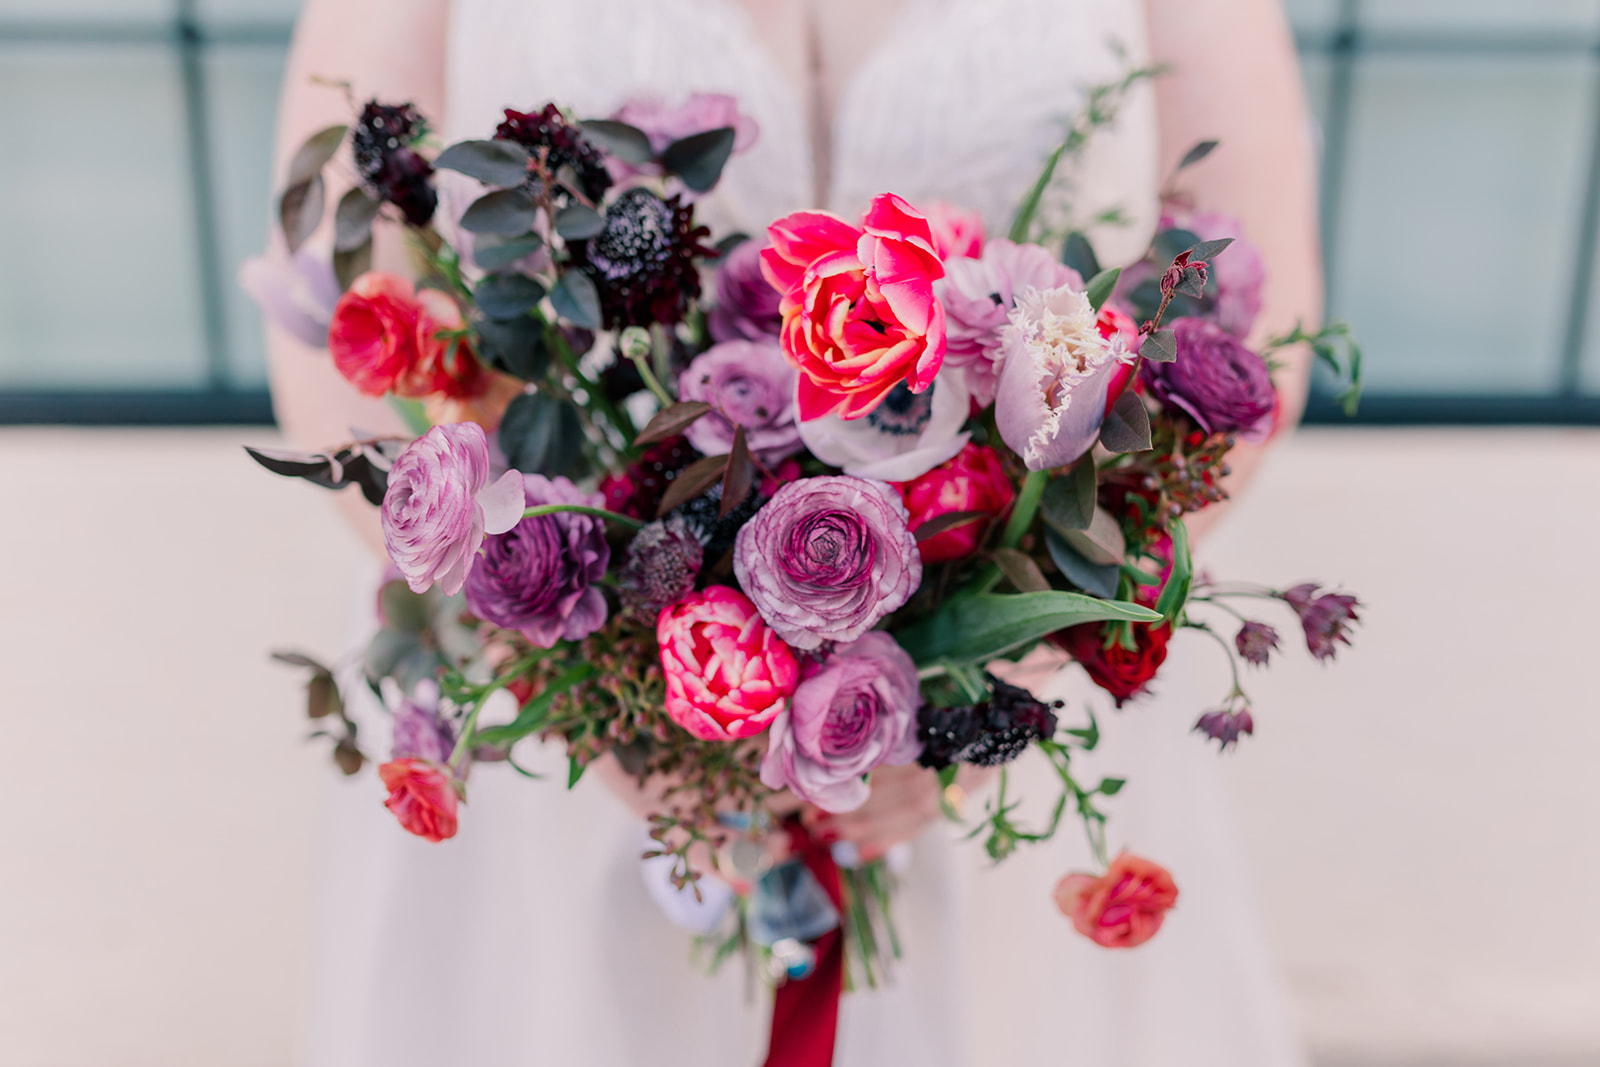 Gorgeous floral bouquet showcasing pinks and purples.